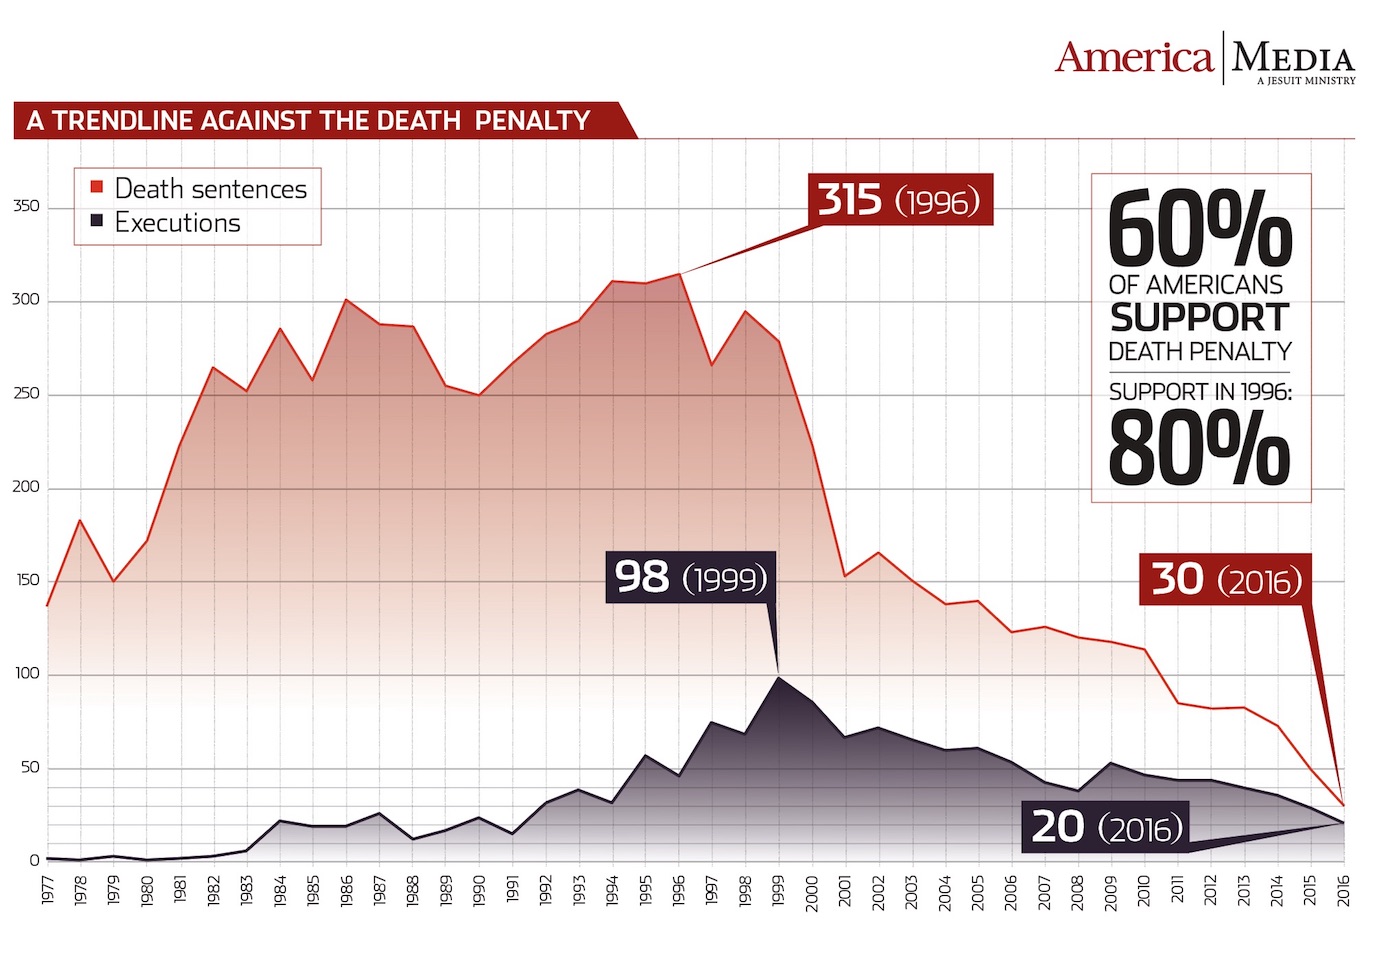 The death penalty is on the decline in the United States.